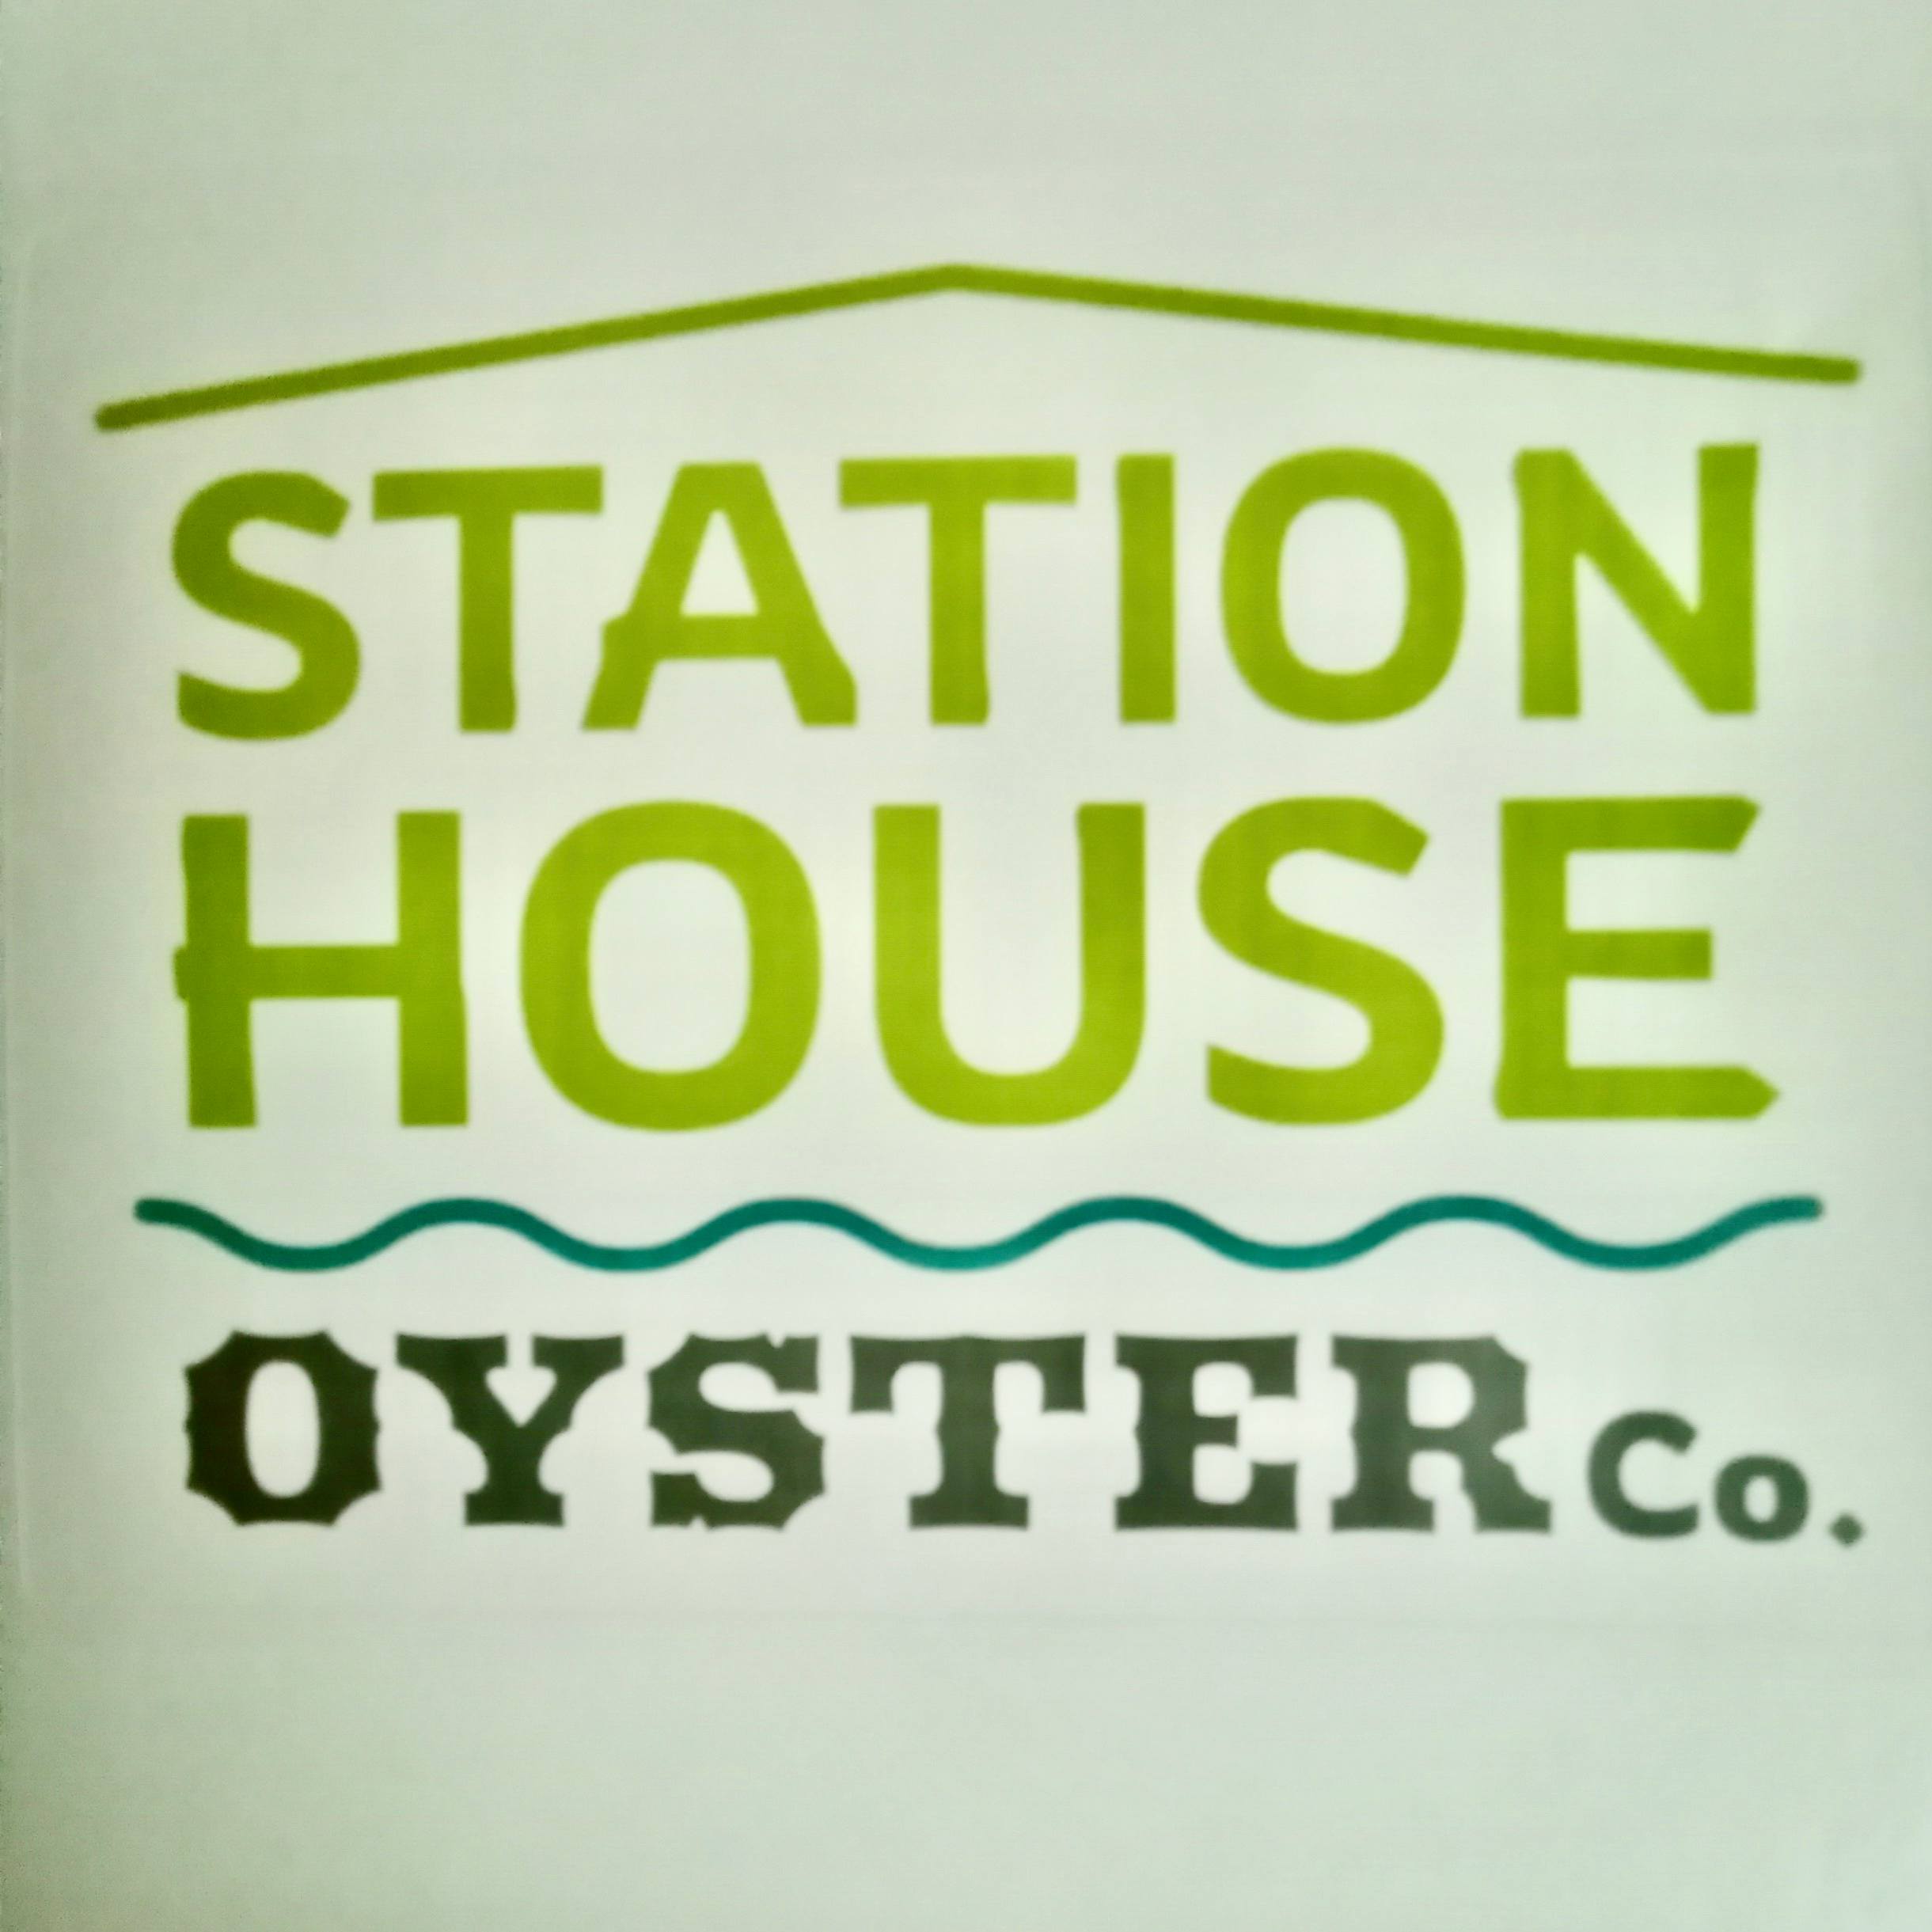 Station House Oyster Co.